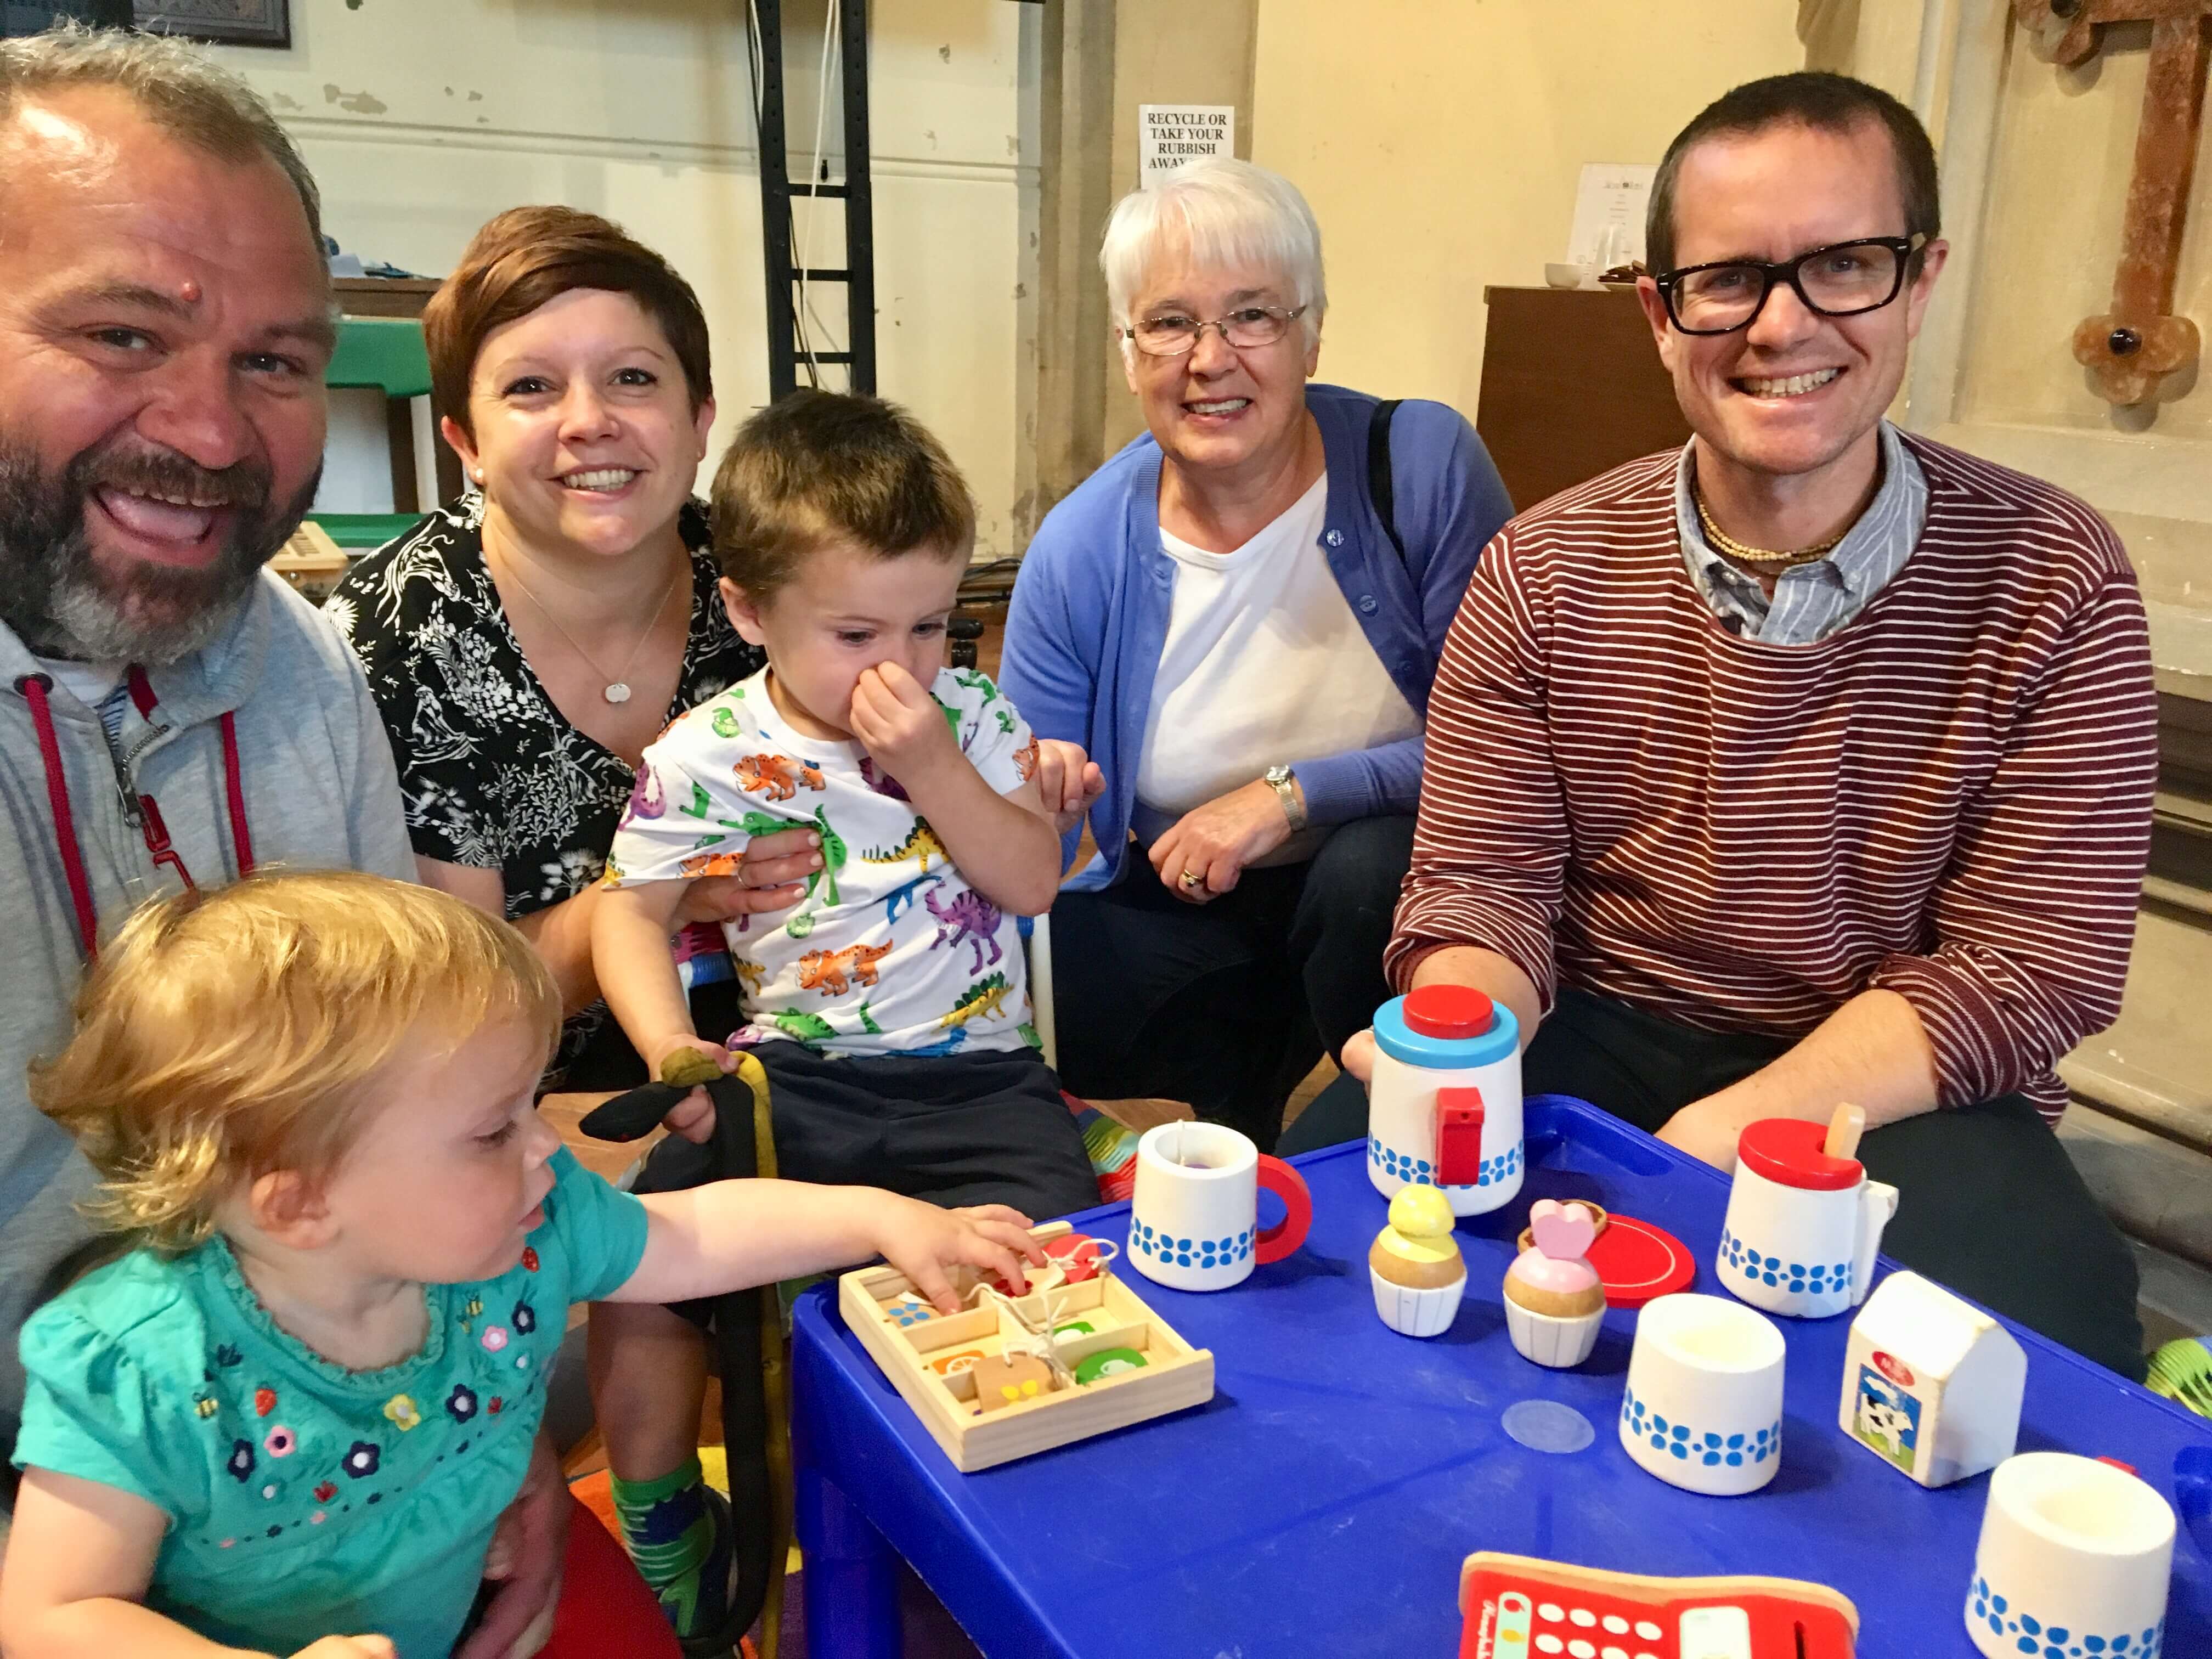 Peasedown Baby-to-Preschool group awarded £200 thanks to village grant scheme